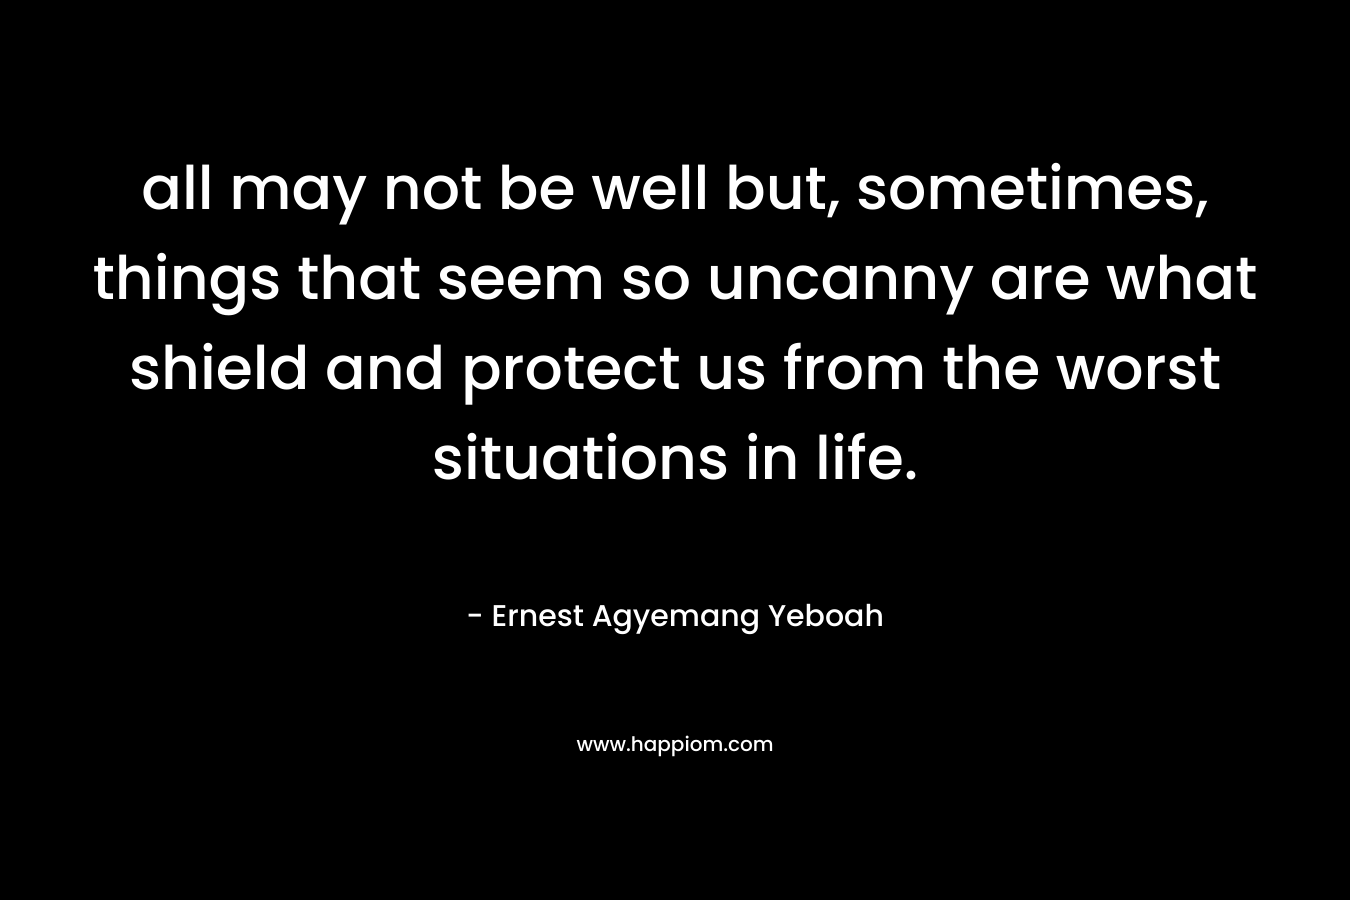 all may not be well but, sometimes, things that seem so uncanny are what shield and protect us from the worst situations in life. – Ernest Agyemang Yeboah